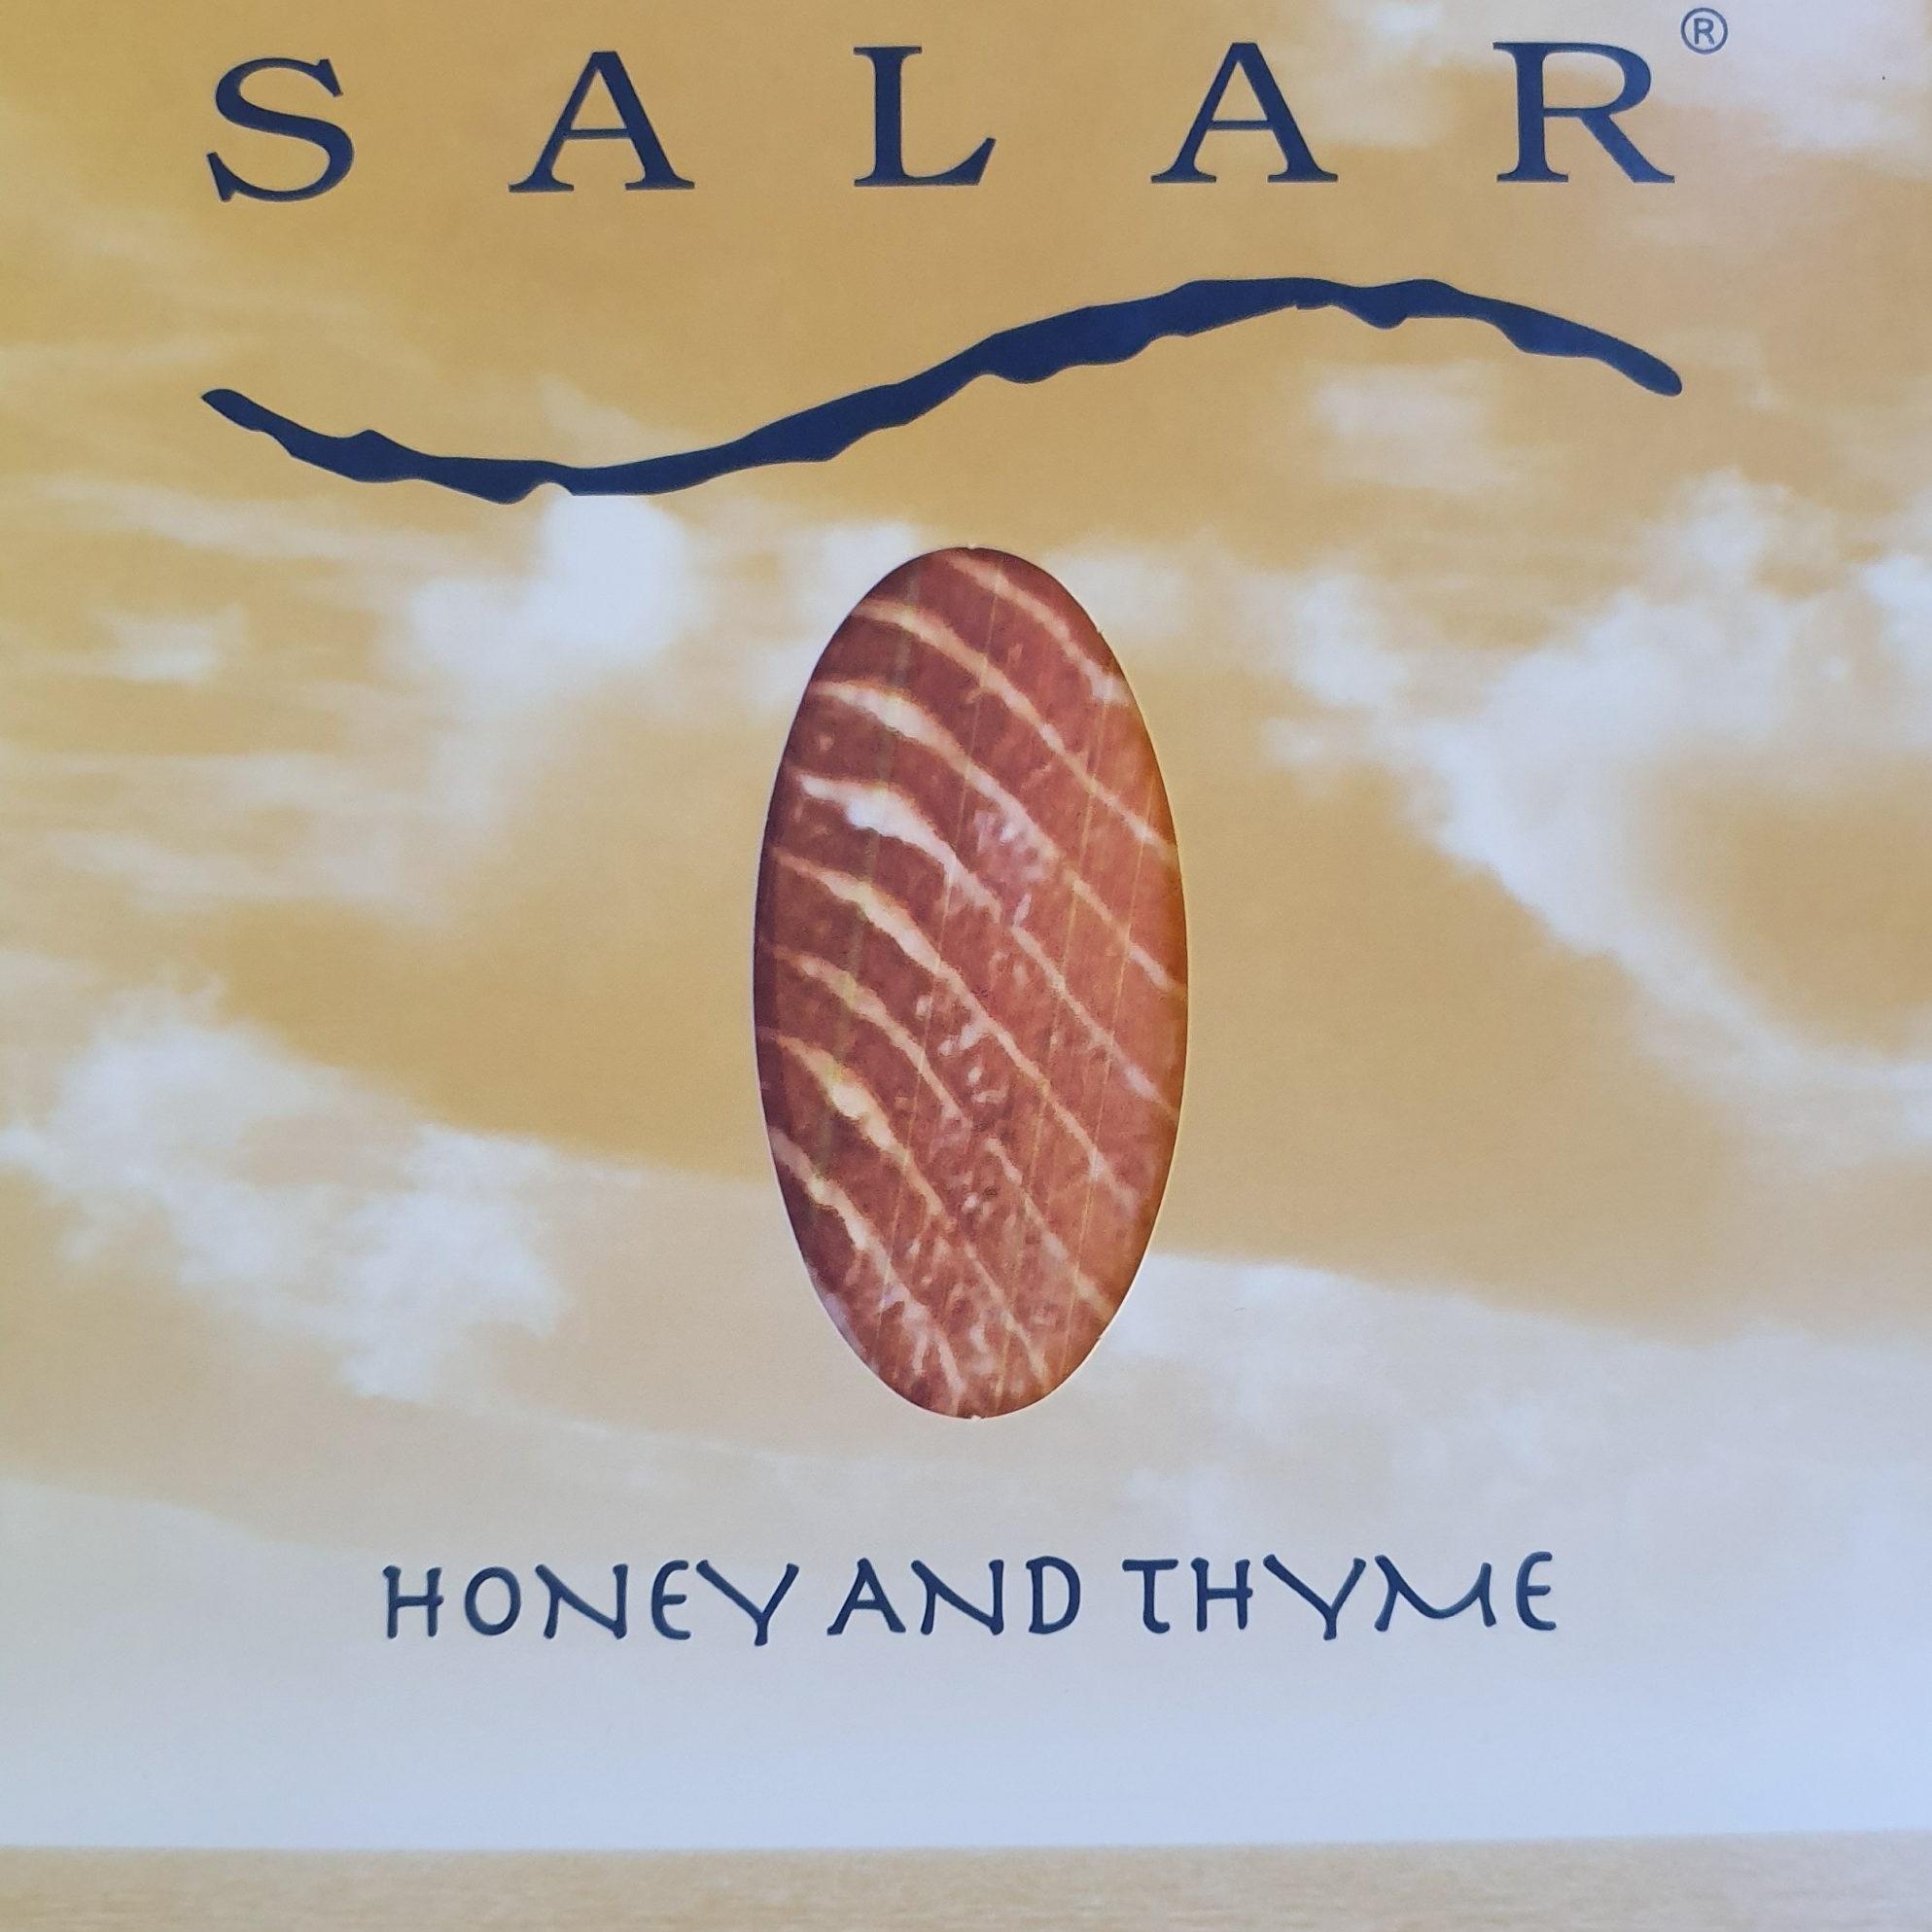 A pack of Salar smoked salmon